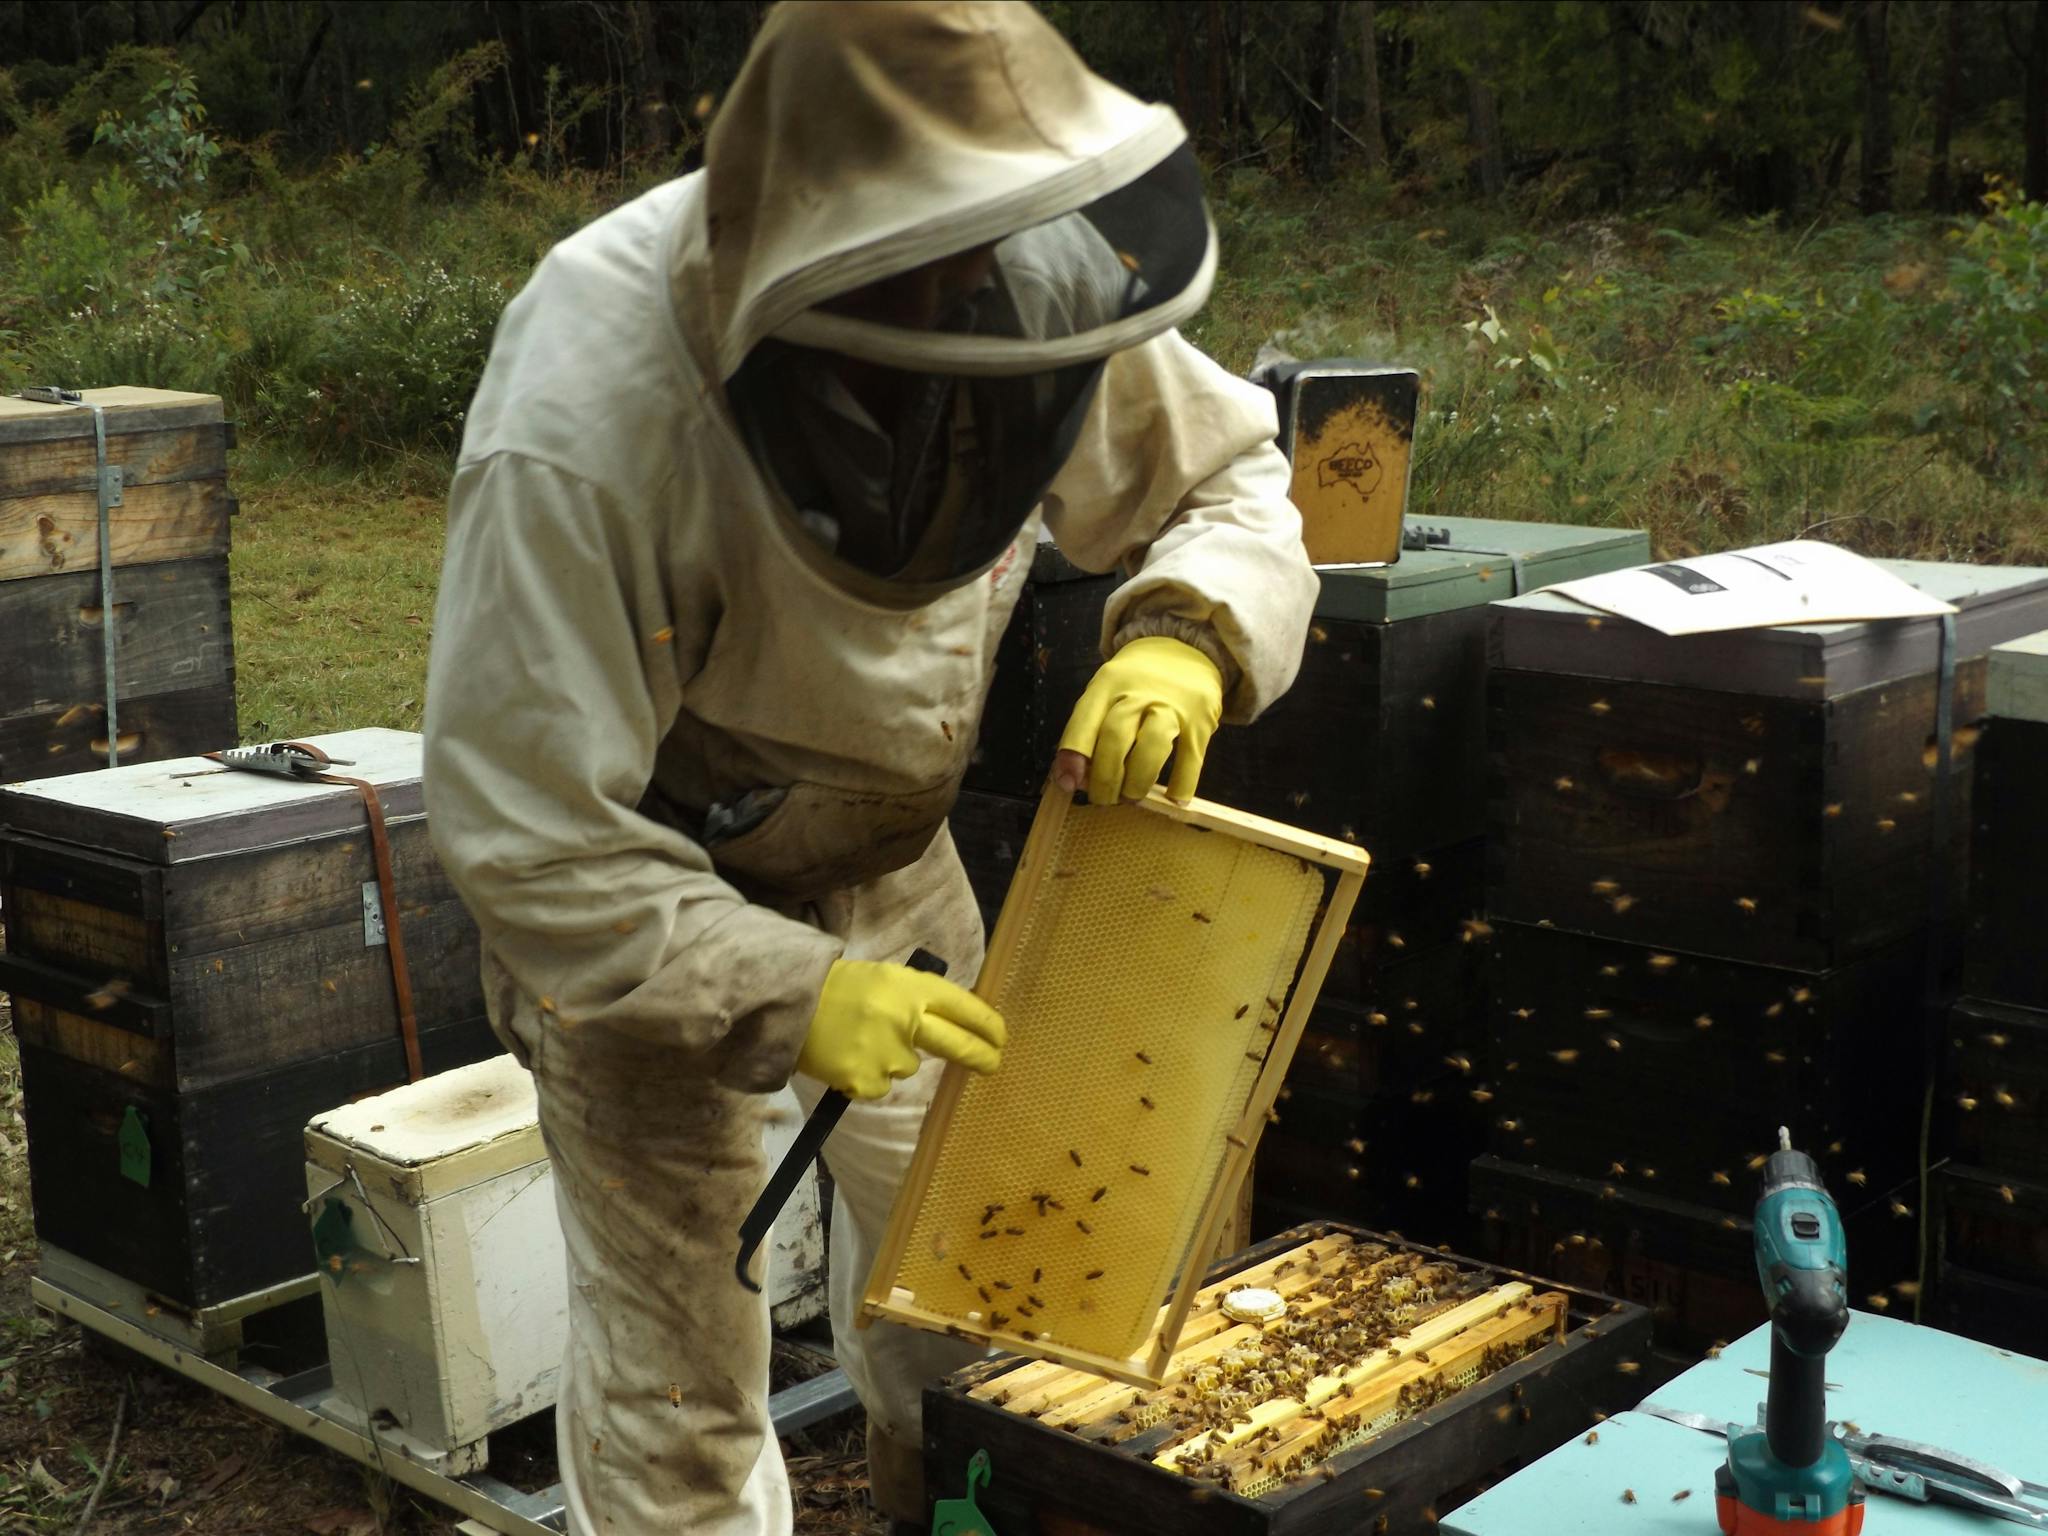 Working with the bees